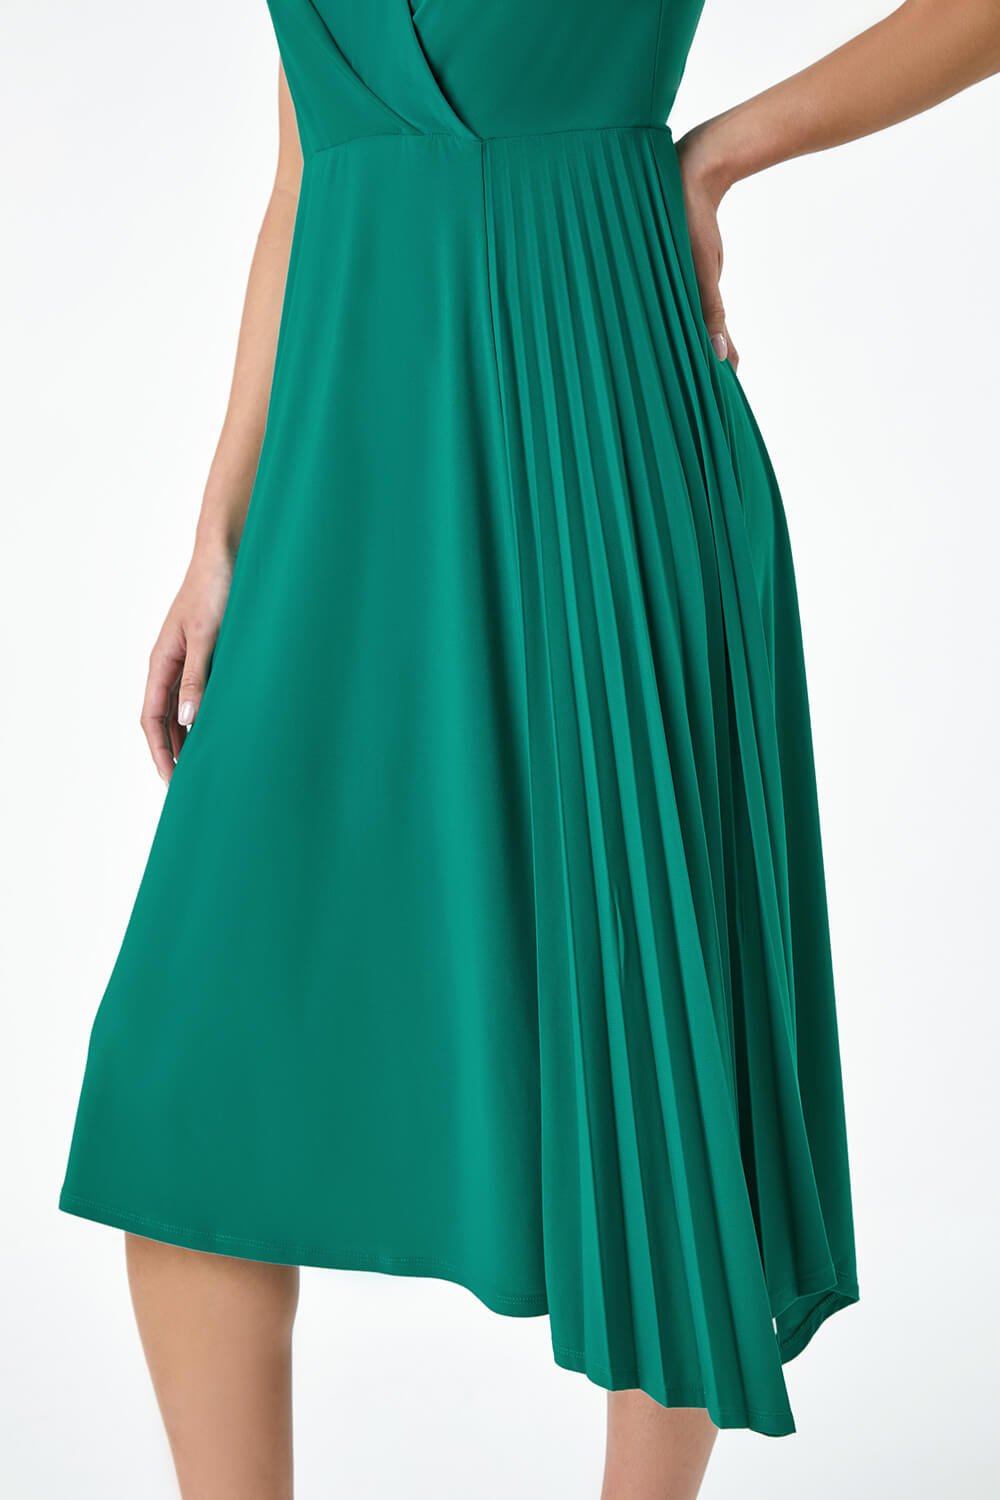 Teal Petite Pleat Detail Stretch Wrap Dress, Image 5 of 5